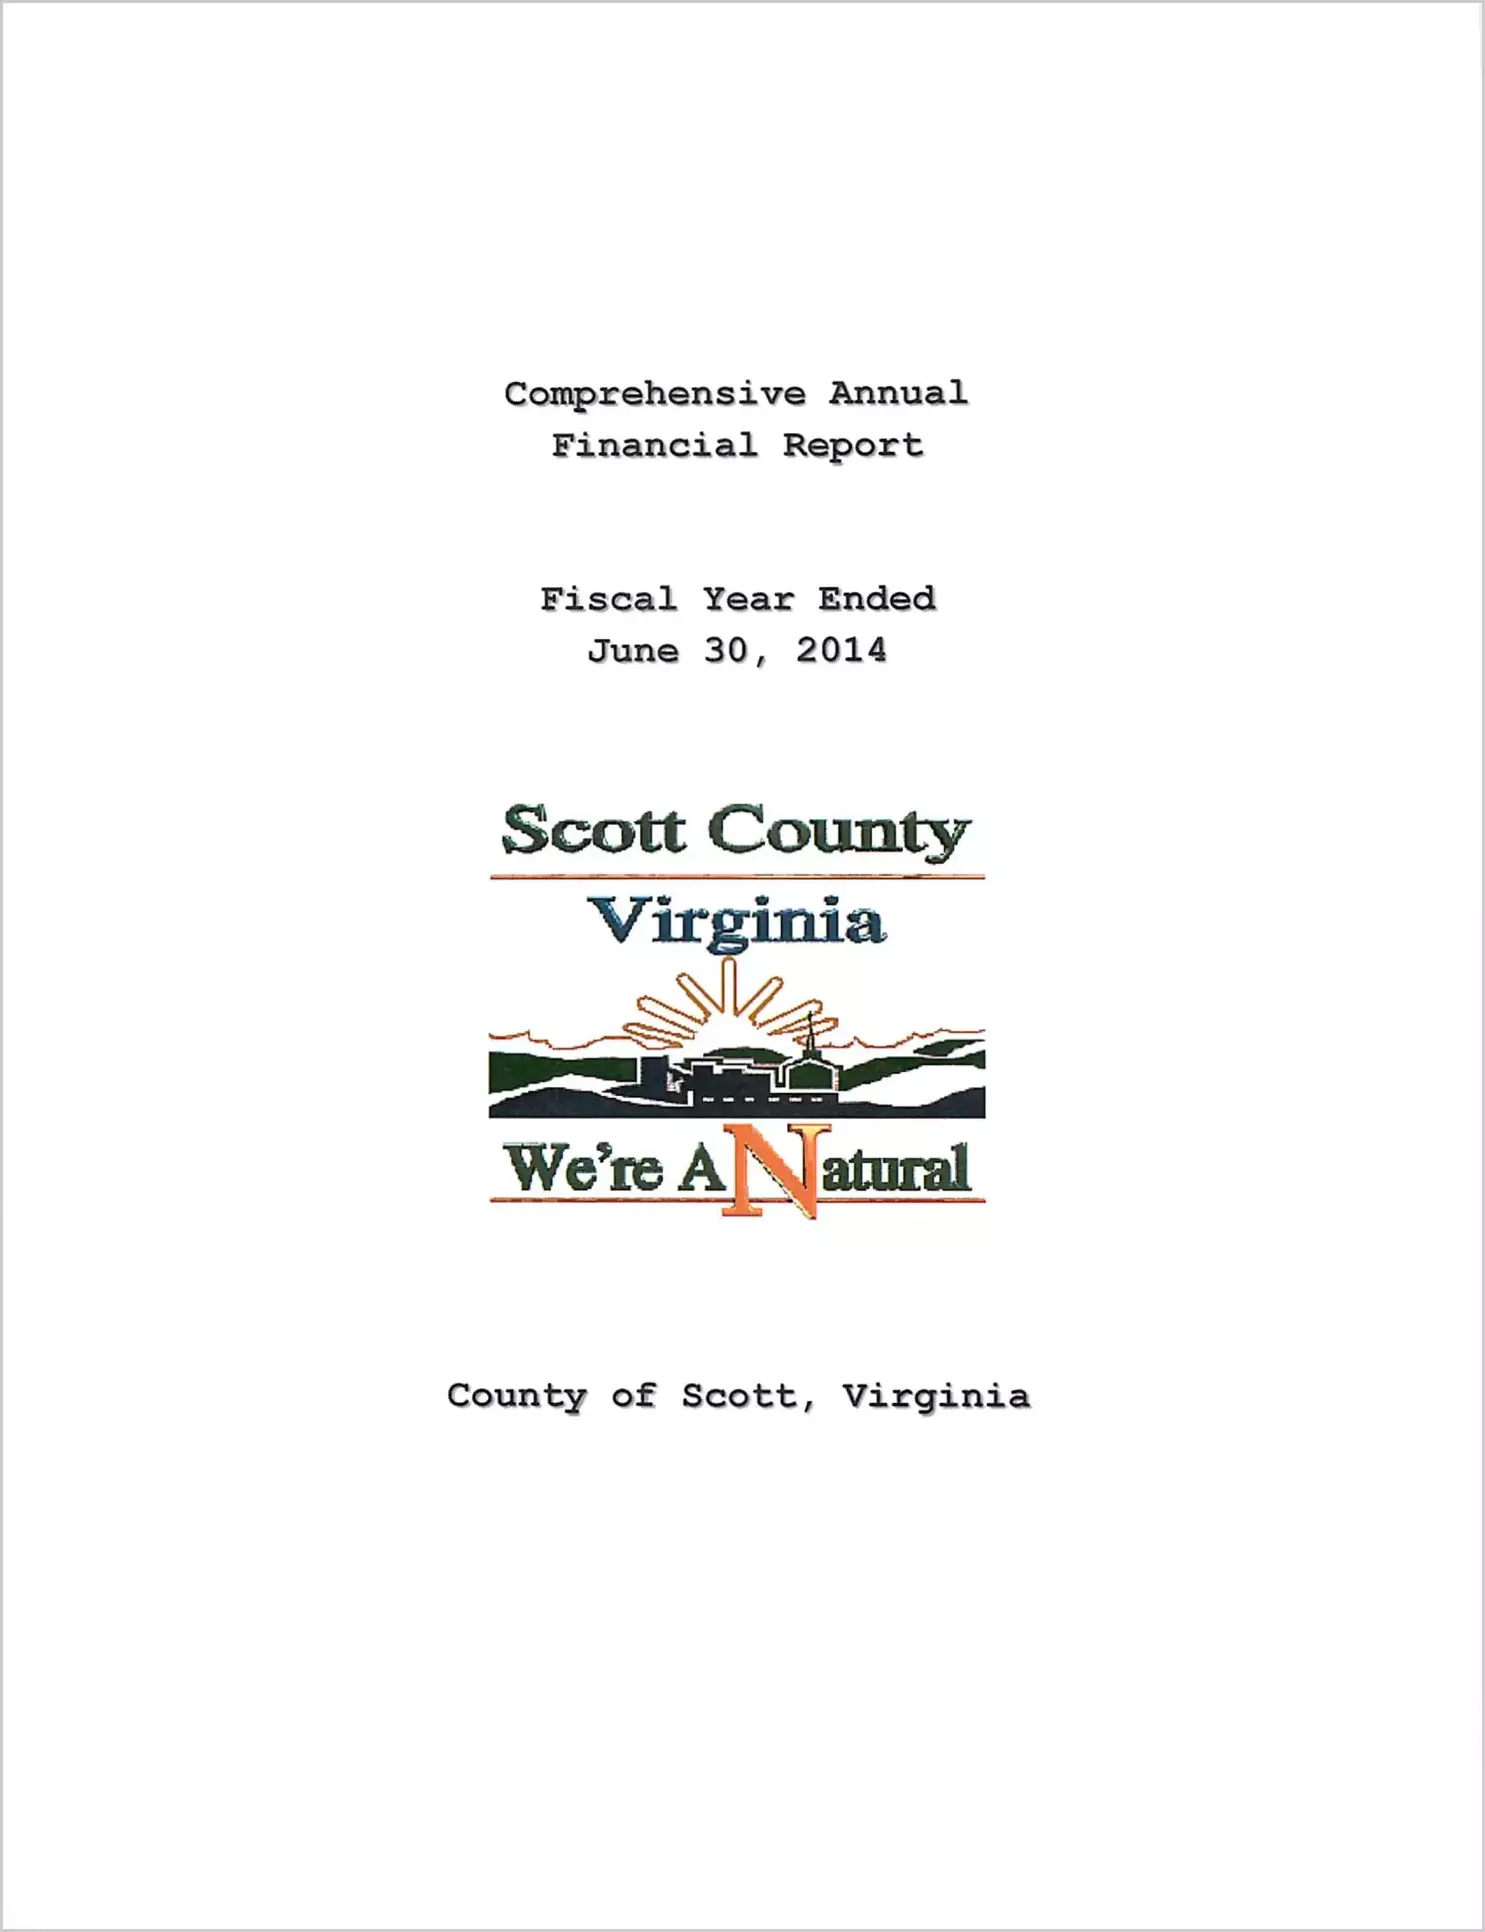 2014 Annual Financial Report for County of Scott